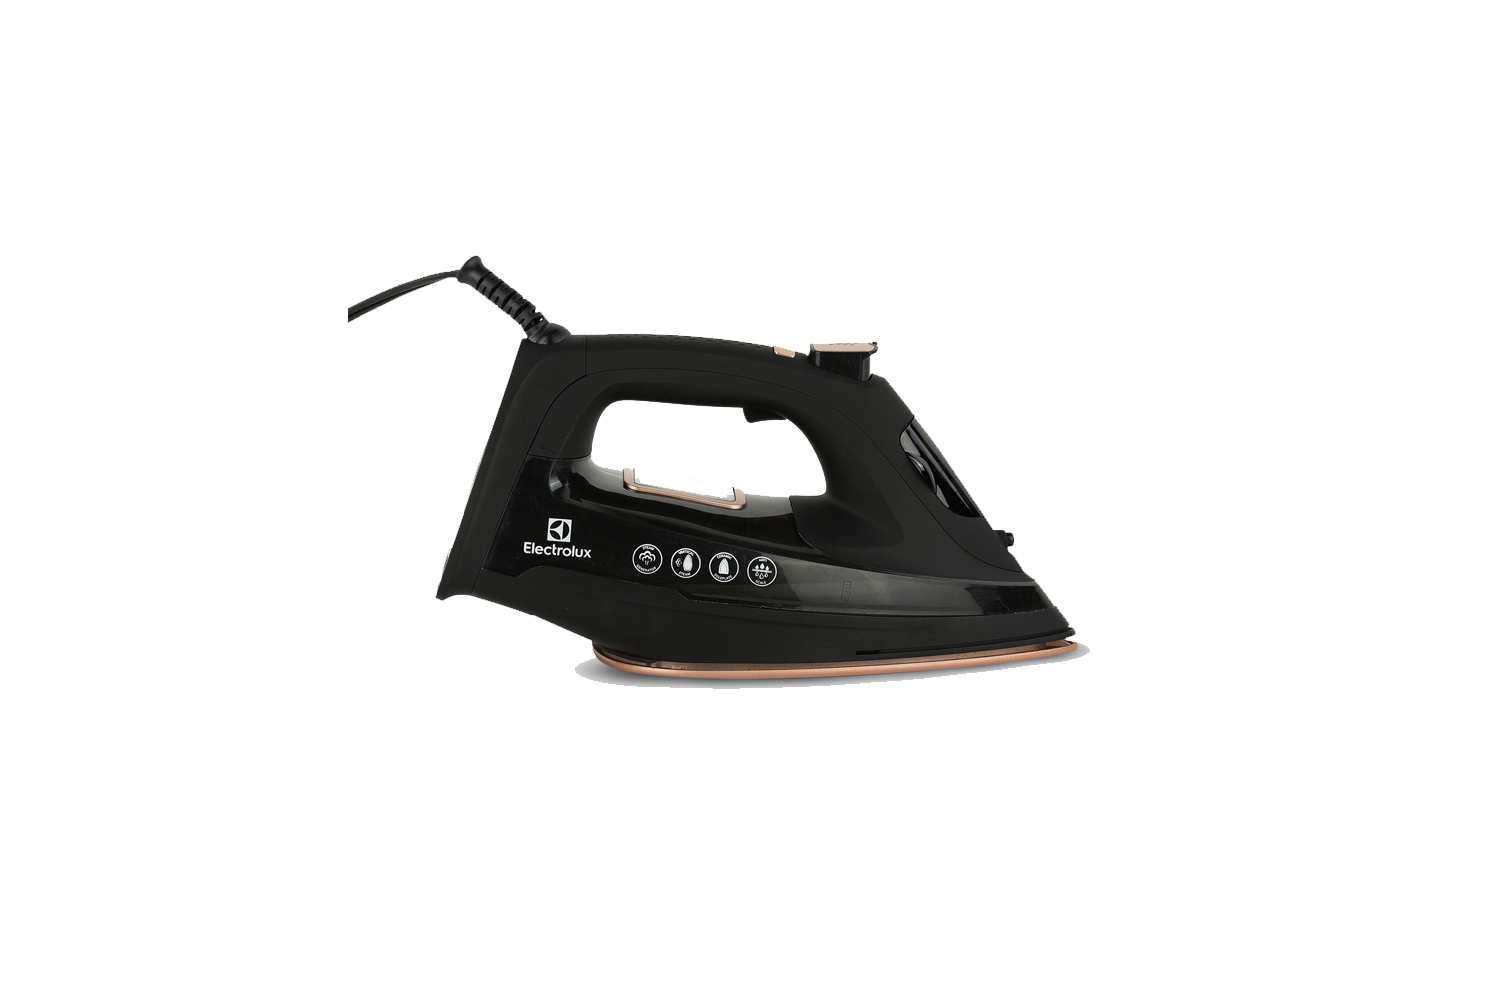 the electrolux steam iron features an even heat nonstick ceramic sole plate, co 9